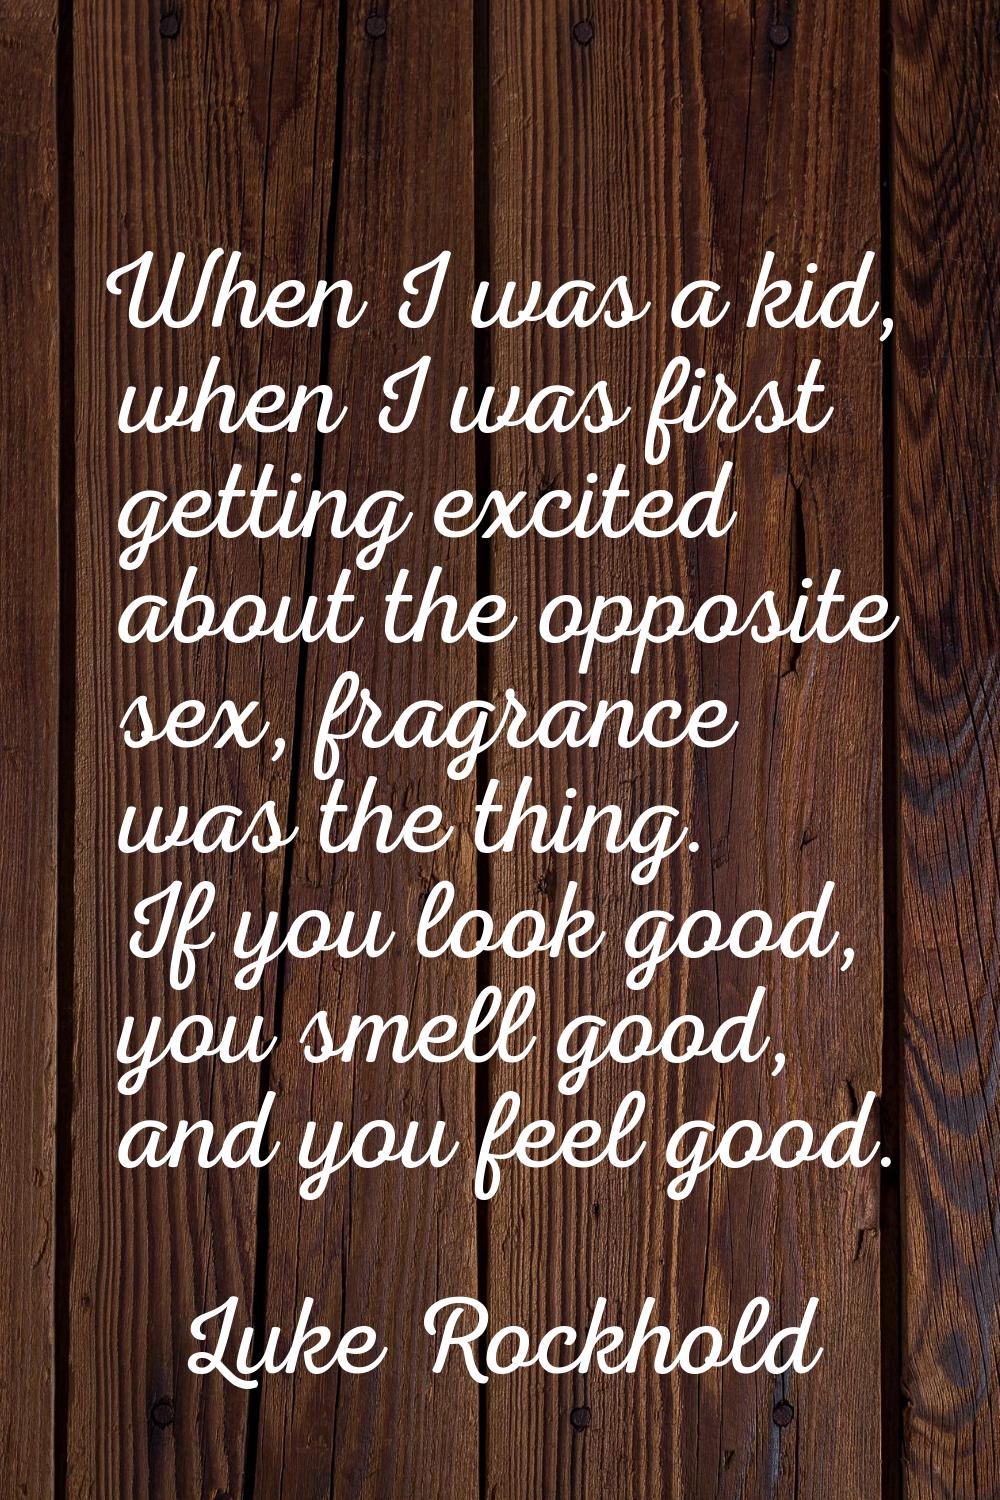 When I was a kid, when I was first getting excited about the opposite sex, fragrance was the thing.